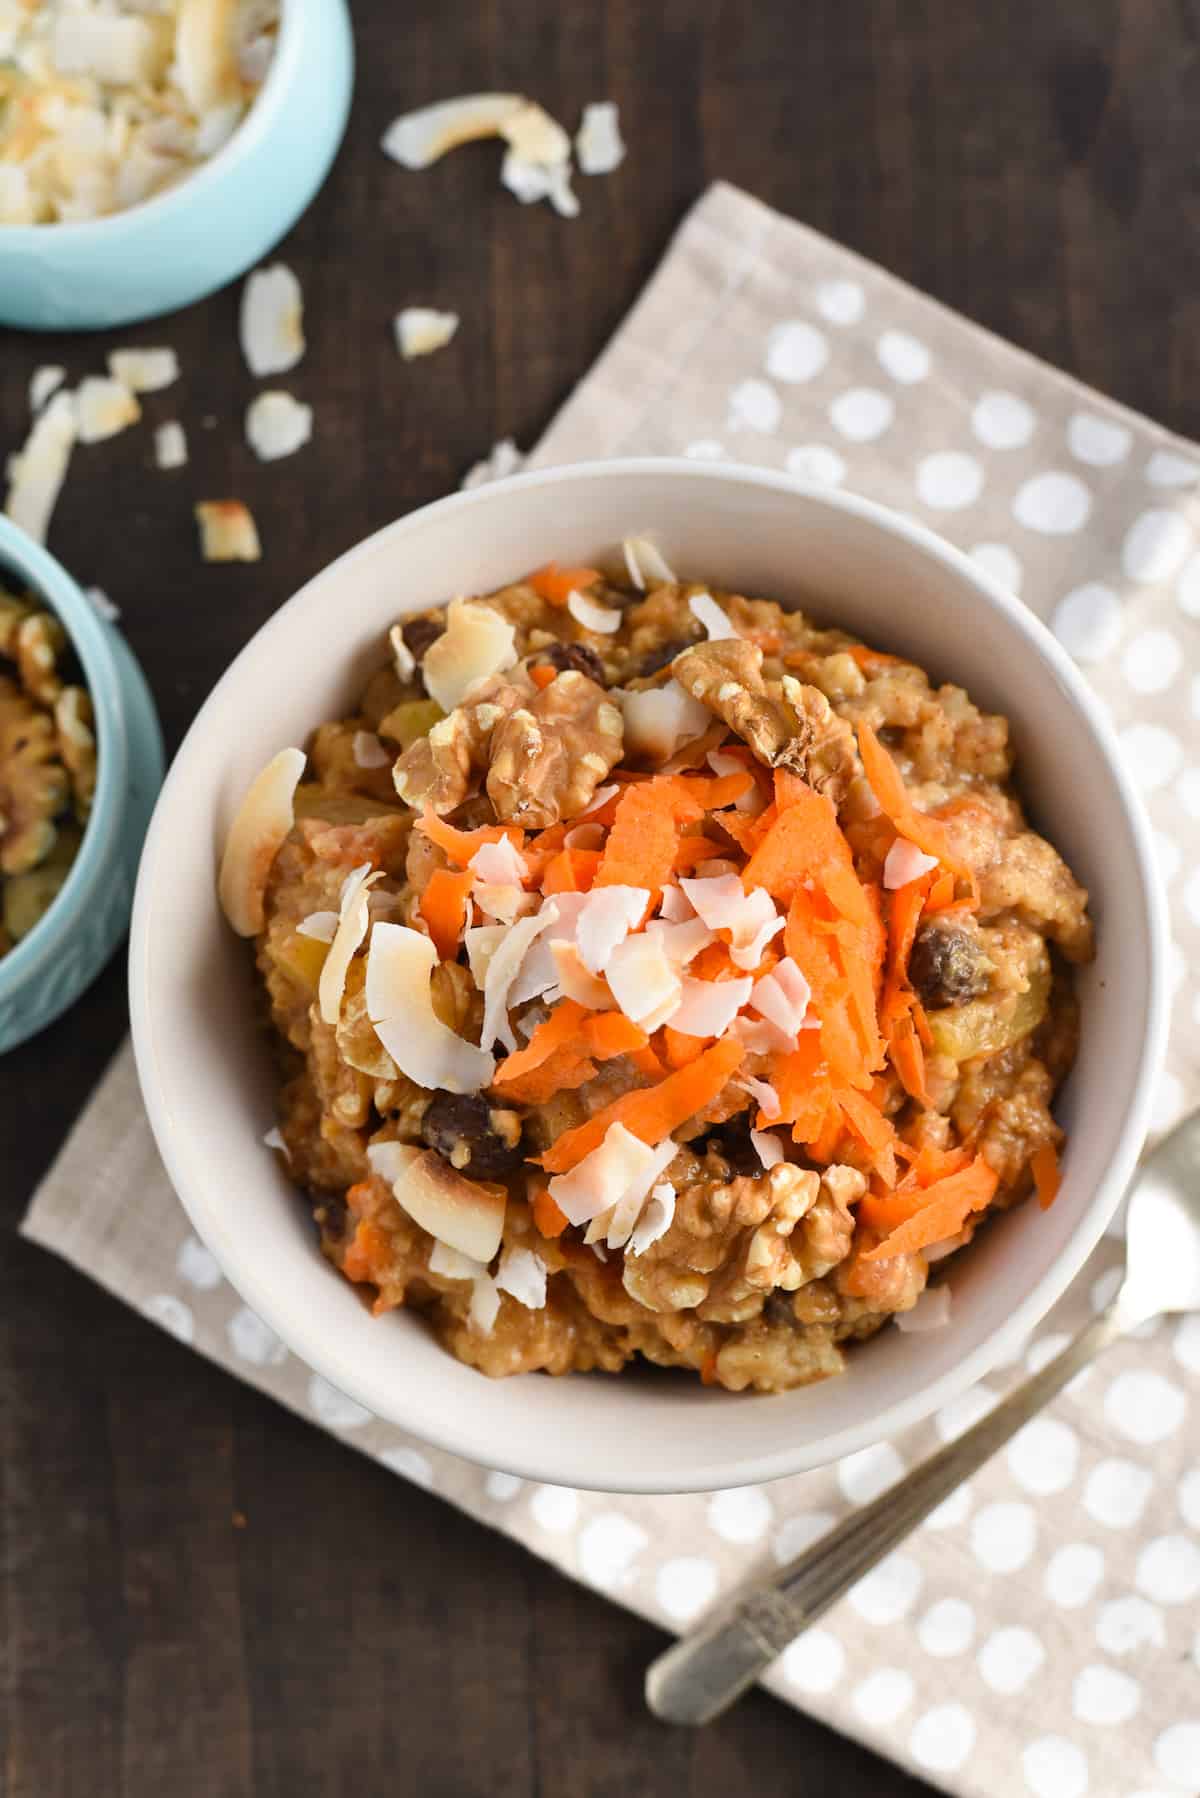 Slow Cooker Overnight Carrot Cake Oatmeal - Put the ingredients for this healthful and delicious breakfast in the crock pot and go to bed! Wake up to the beautiful smells of carrot cake! | foxeslovelemons.com